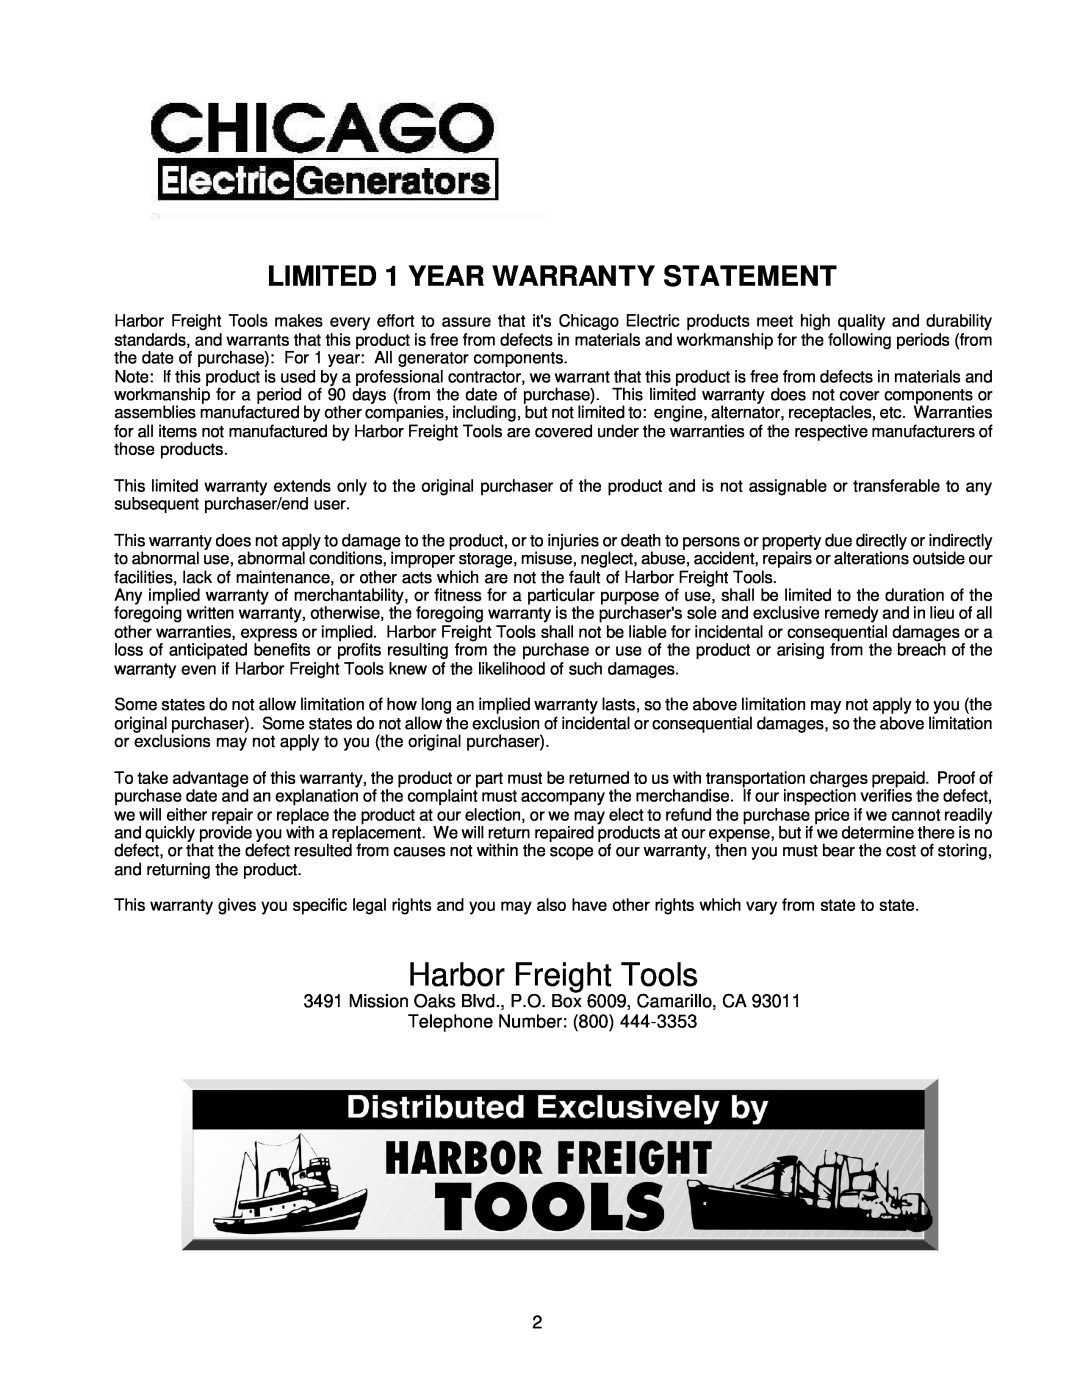 Chicago Electric 42723, 42727, 40814, 42724, 42725, 39461, 39982, 39984 LIMITED 1 YEAR WARRANTY STATEMENT, Harbor Freight Tools 